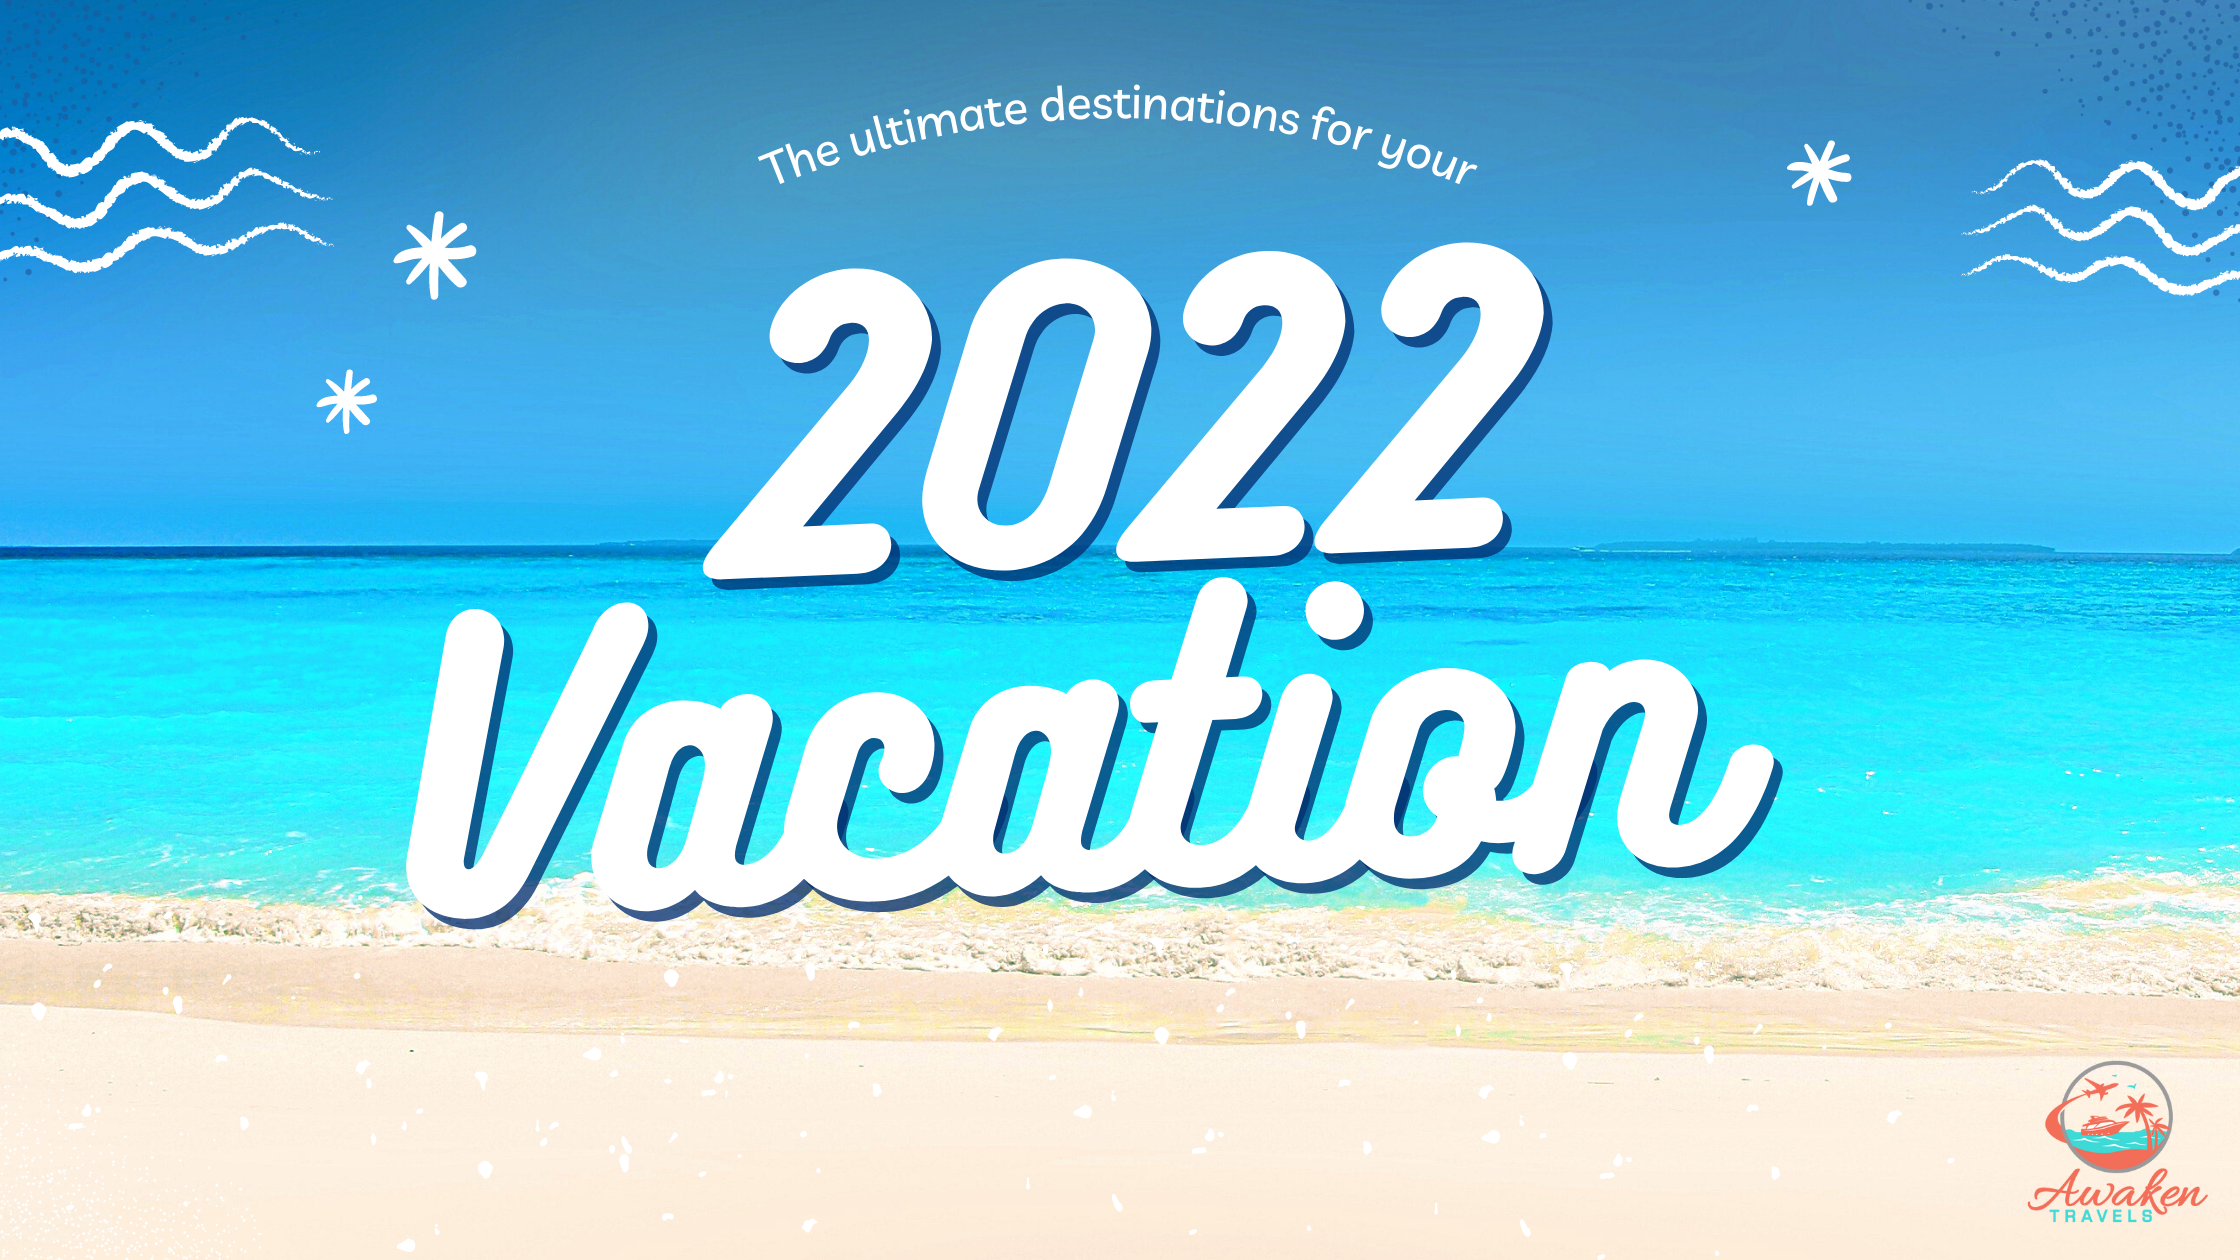 2022 vacation destination guide cover photo with a sandy beach in the sun